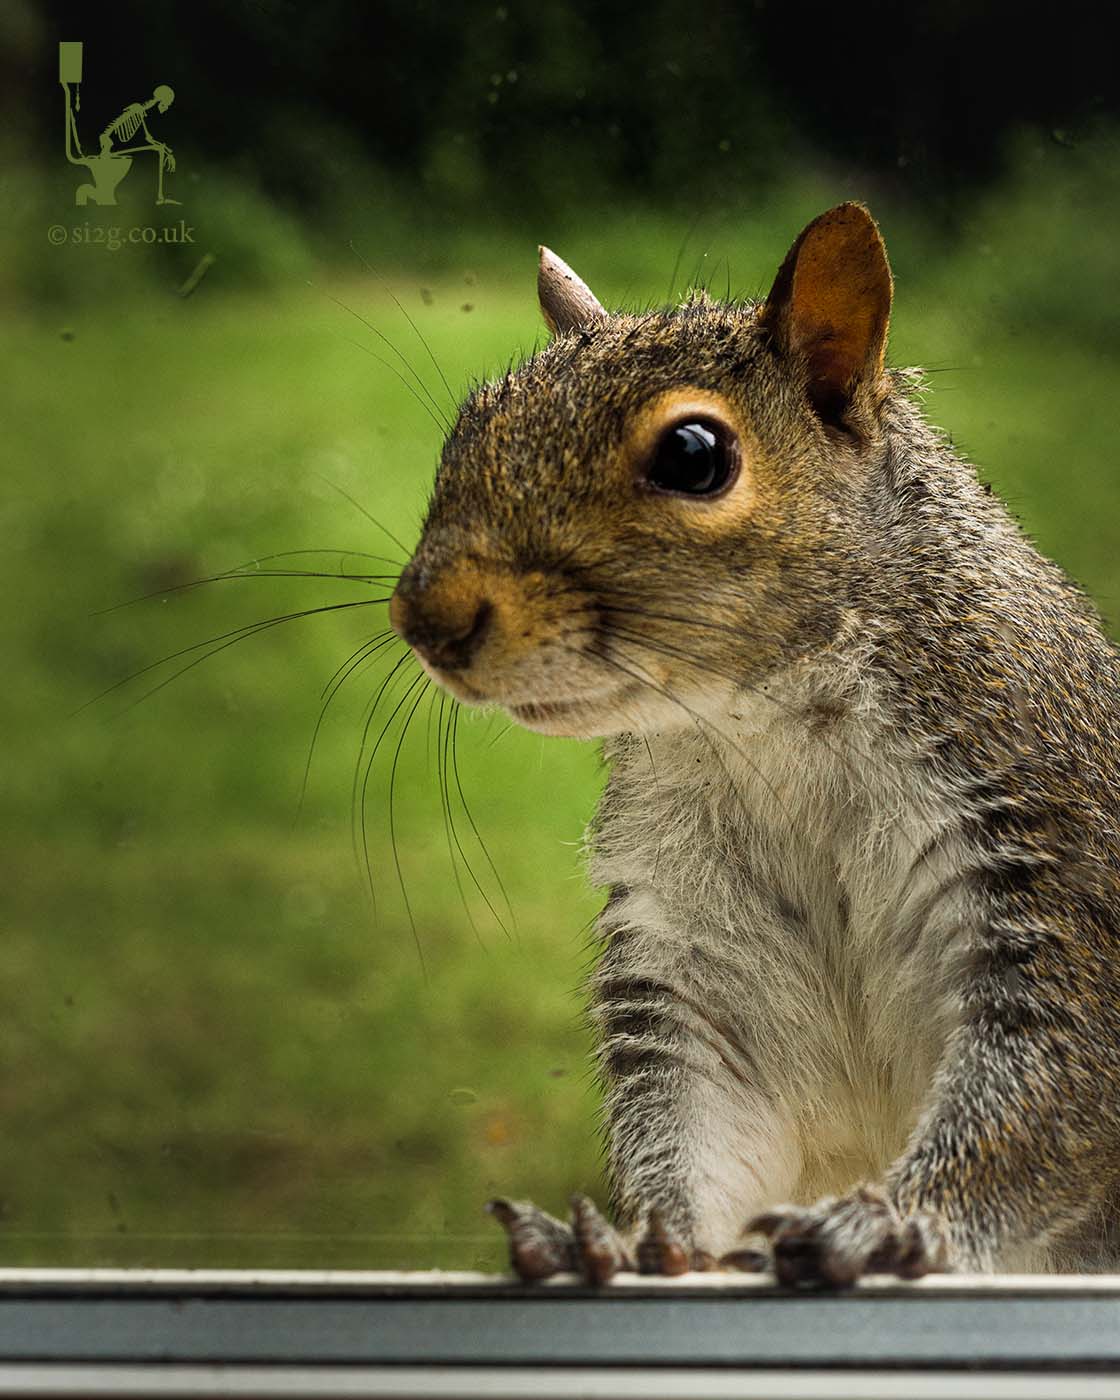 Squirrel - This cheeky little character comes to the window to watch you working.